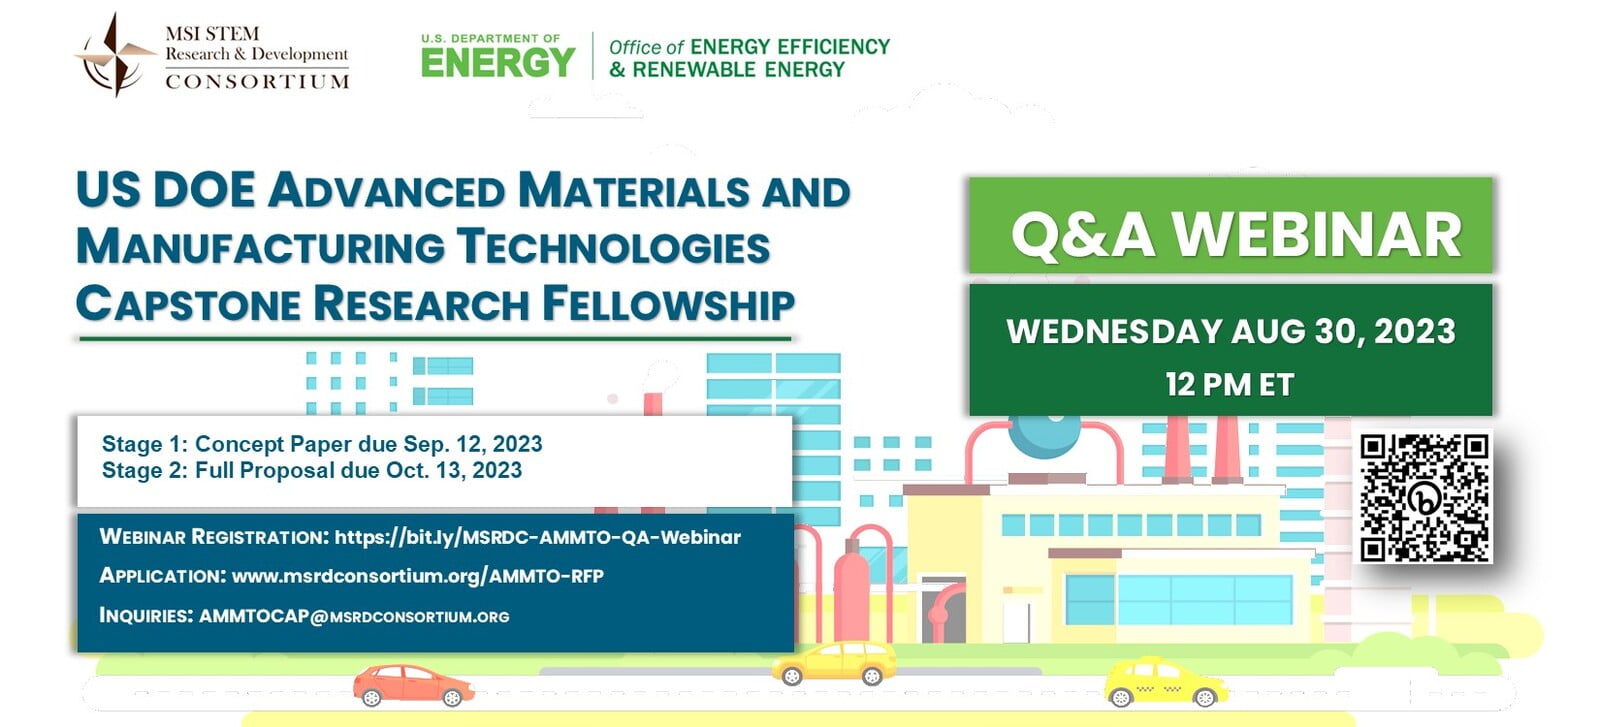 Q & A Webinar - MSRDC and DOE Promoting Pathways for Underrepresented Groups in Advanced Materials & Manufacturing Technologies